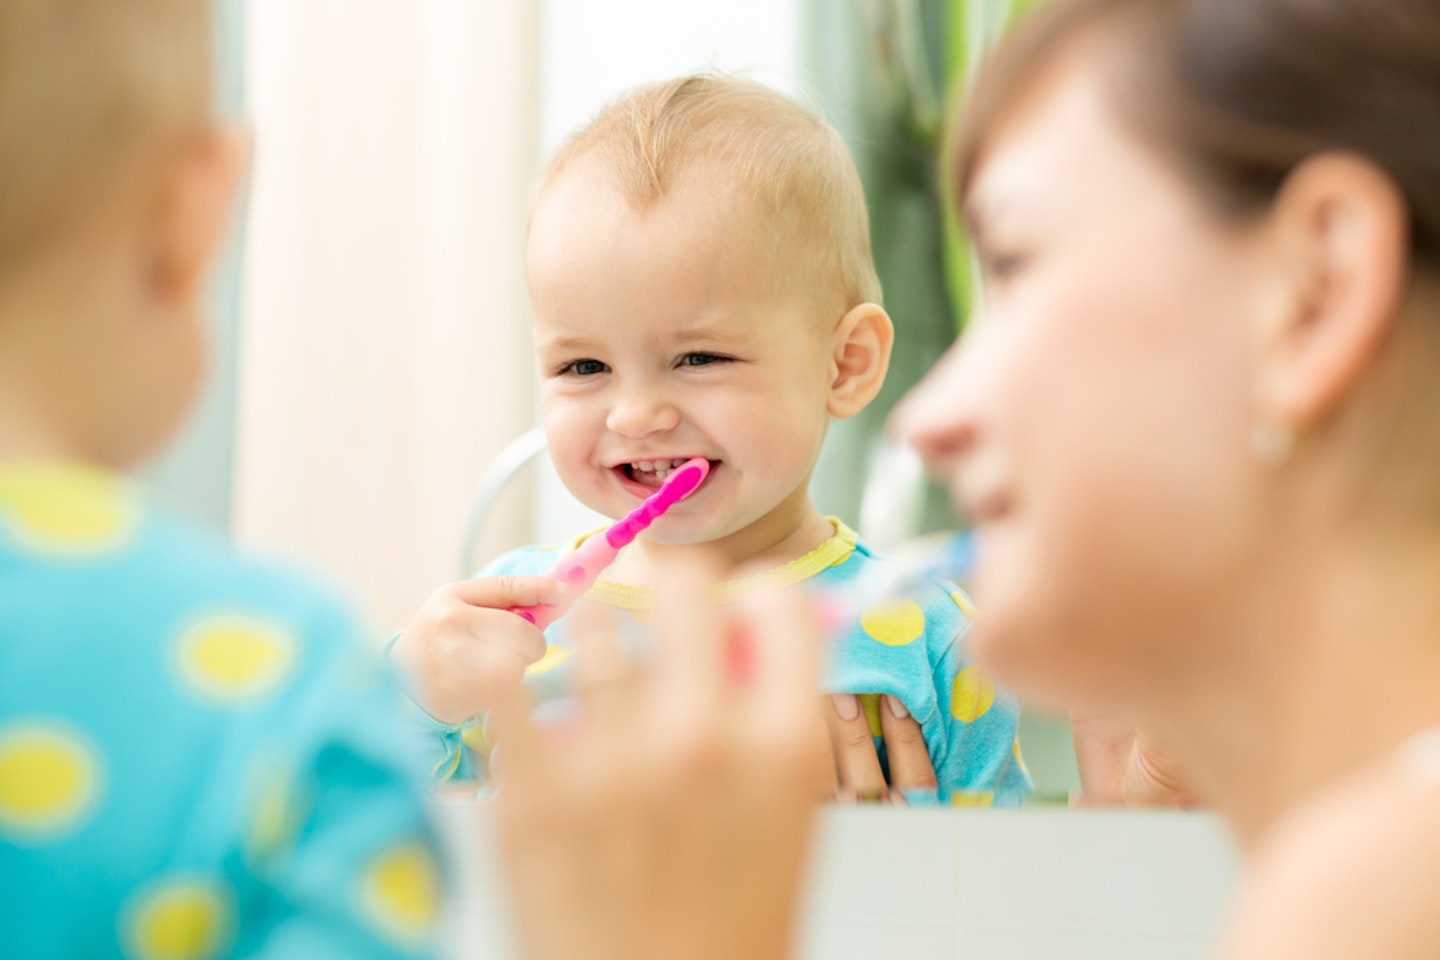 Mum and toddler brushing their teeth together